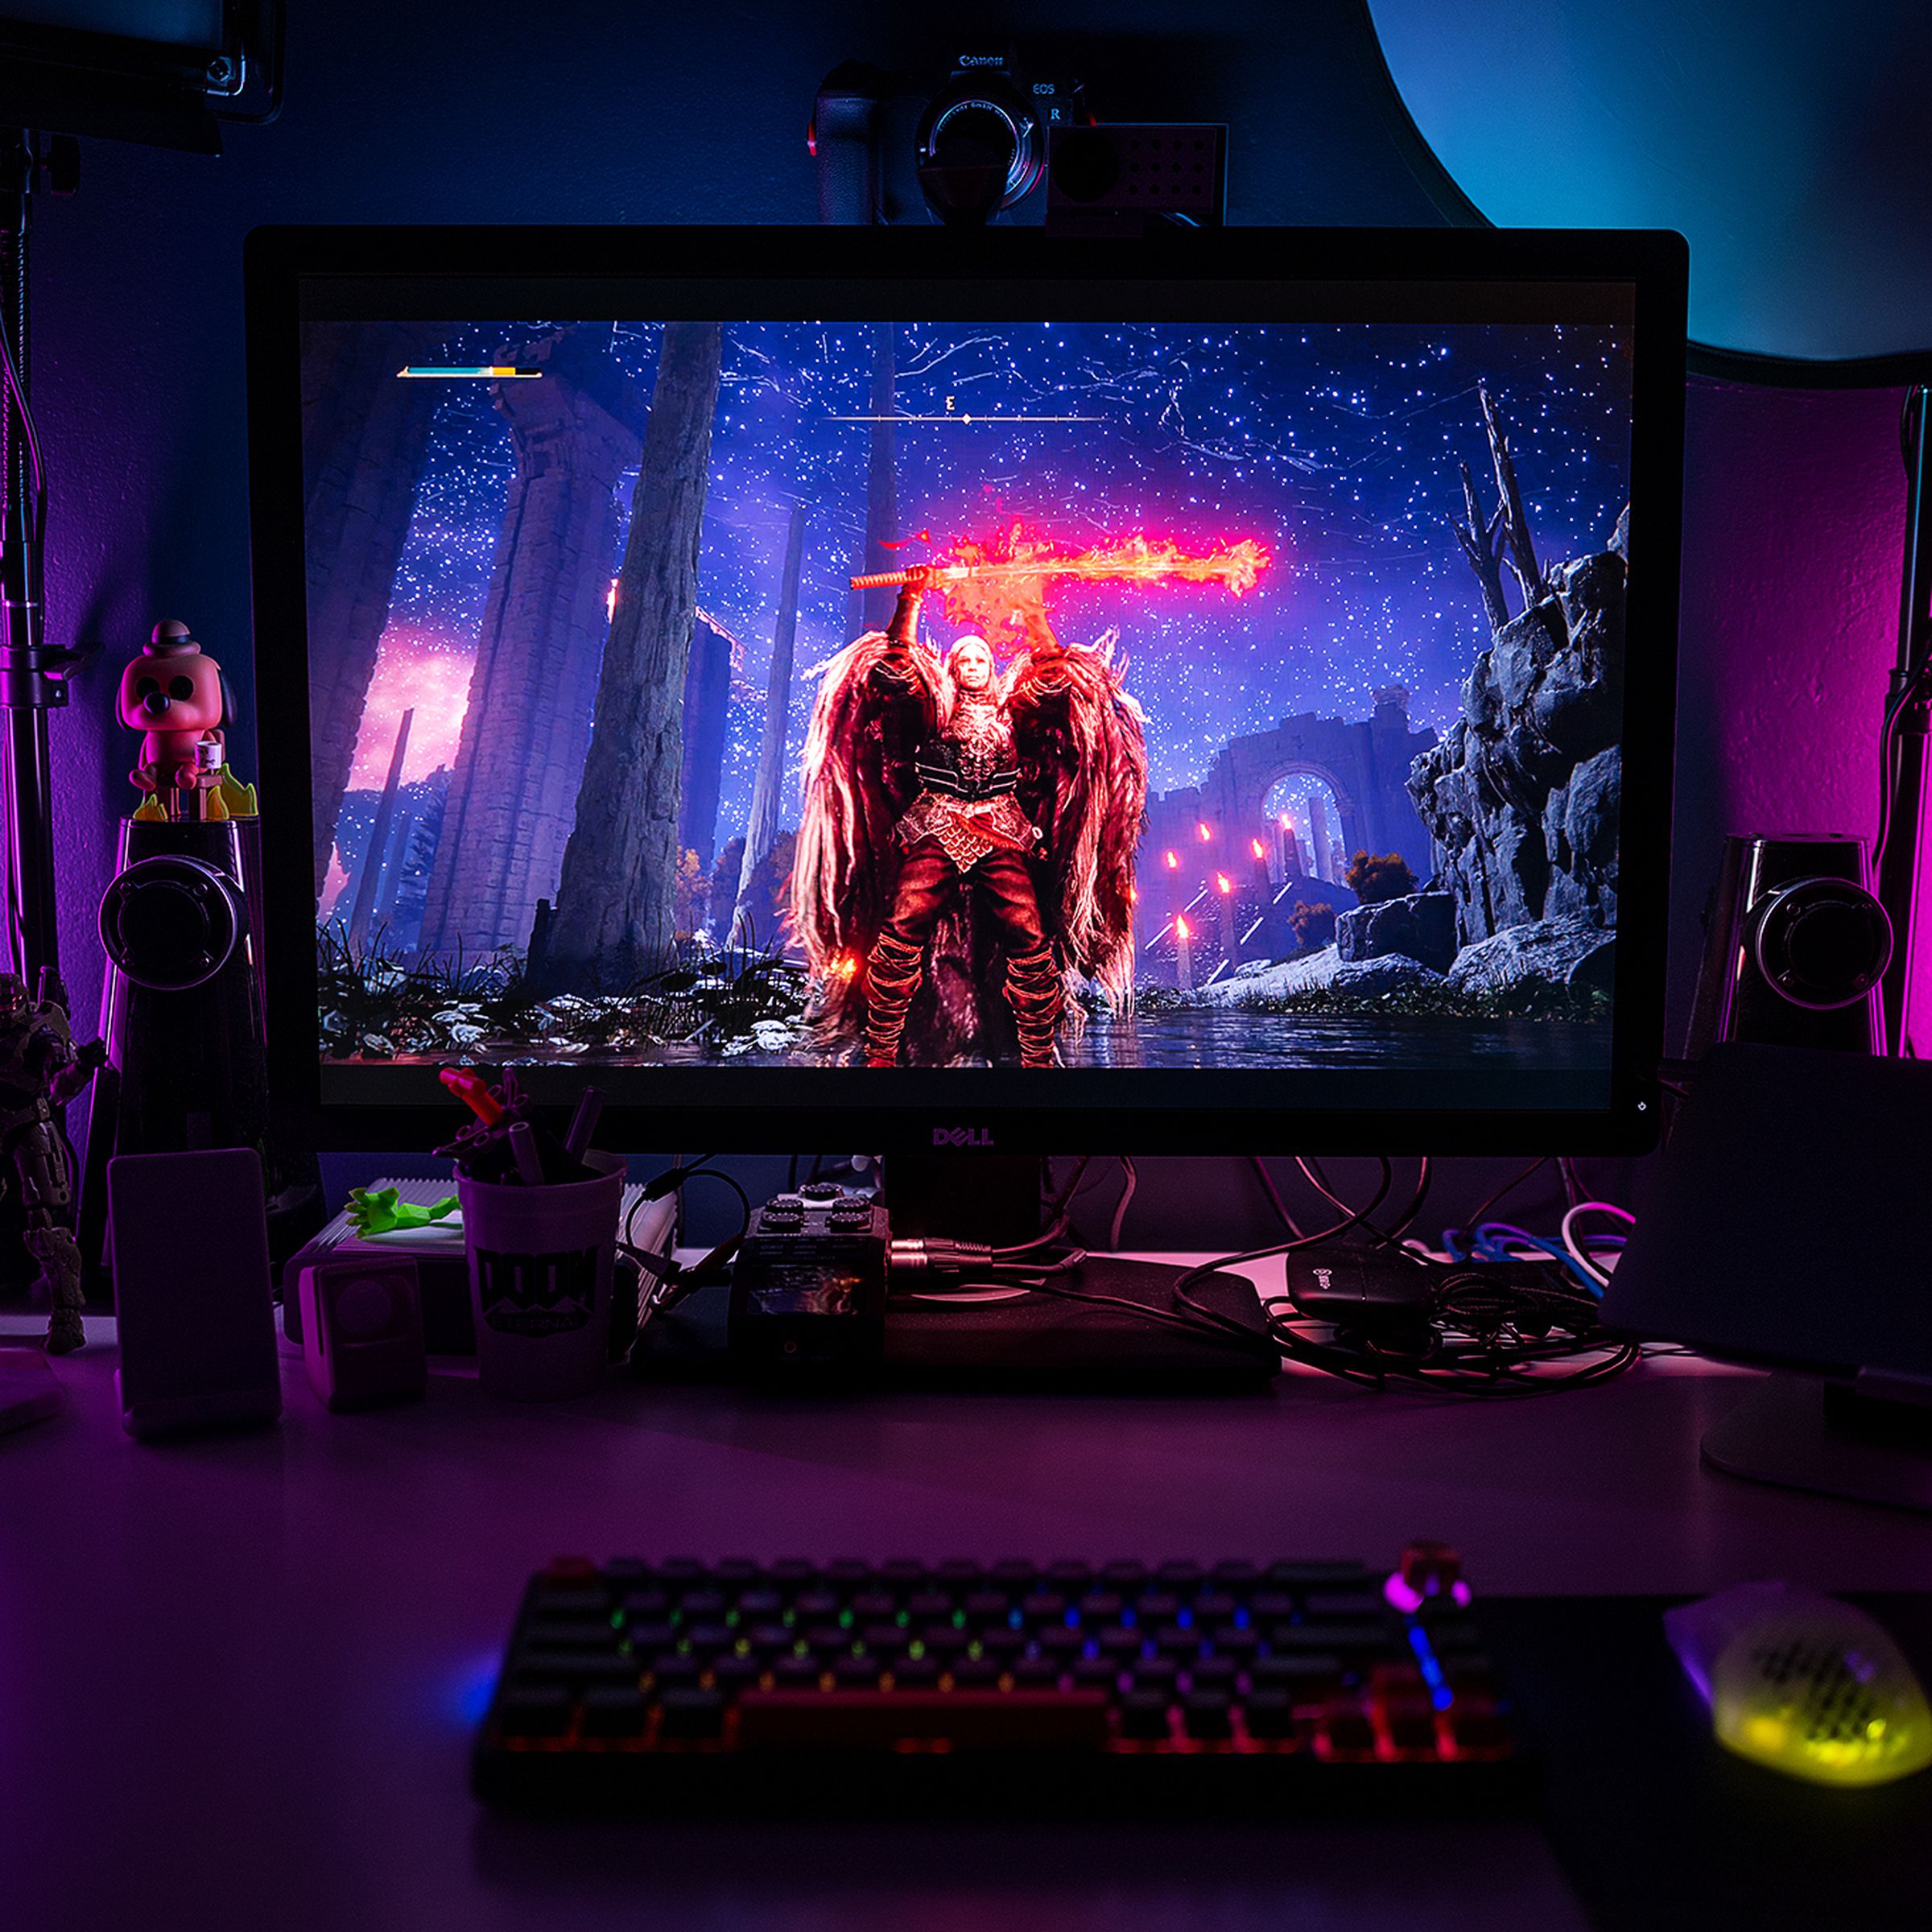 The three-point RGBIC lighting setup of the Govee DreamView G1 Pro, set up on a monitor on a desk.